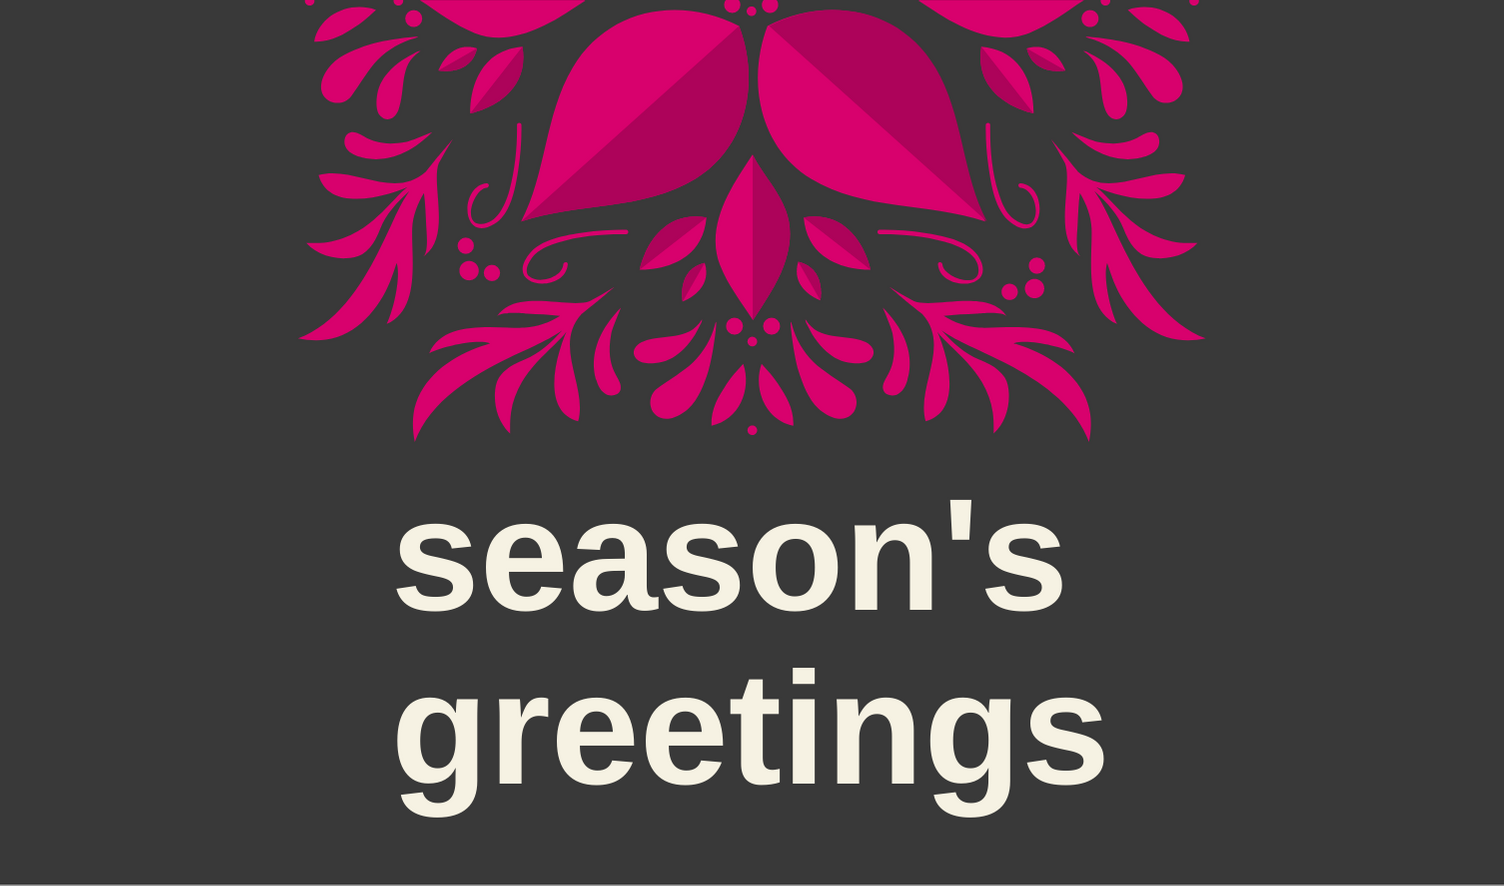 A pink floral motif on a dark grey background. The words season's greetings in under the floral motif